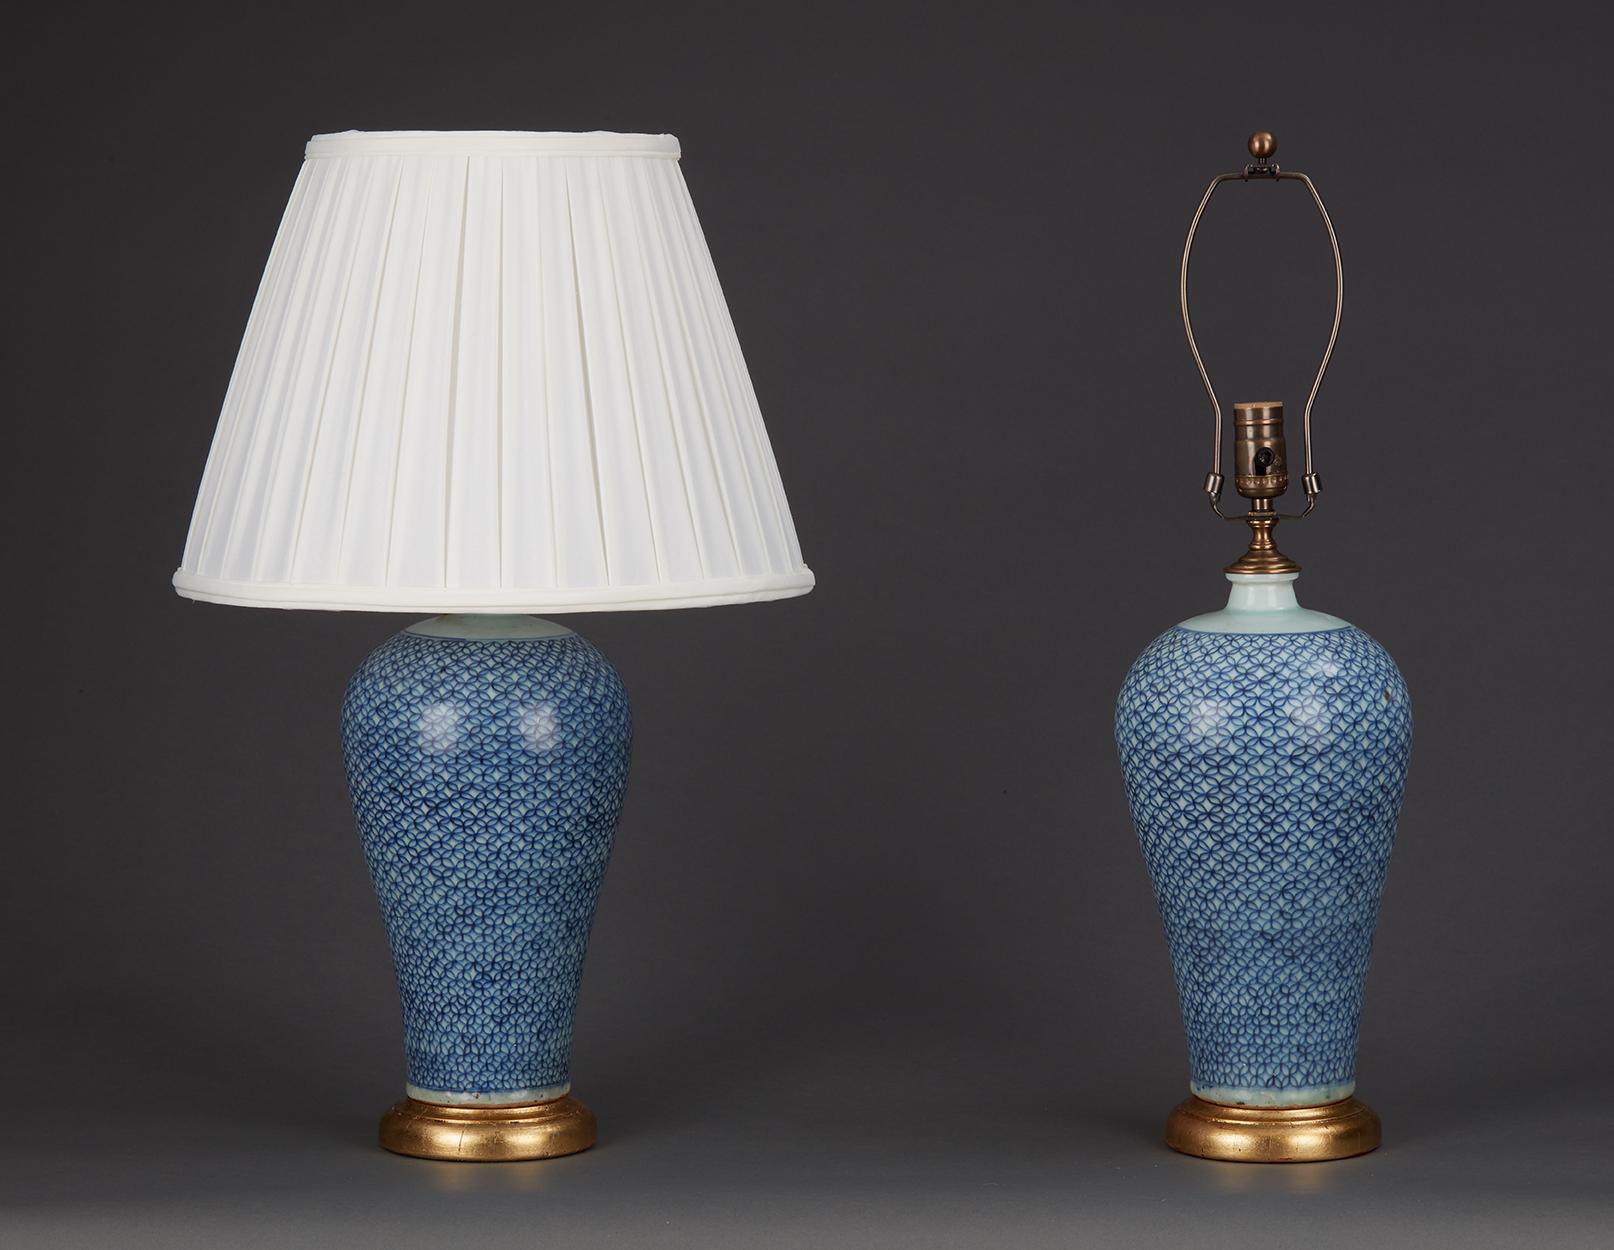 Pair of Blue and White Chinese Porcelain lamps with Geometric Pattern. Gilded Bases. 20th Century.
7.5